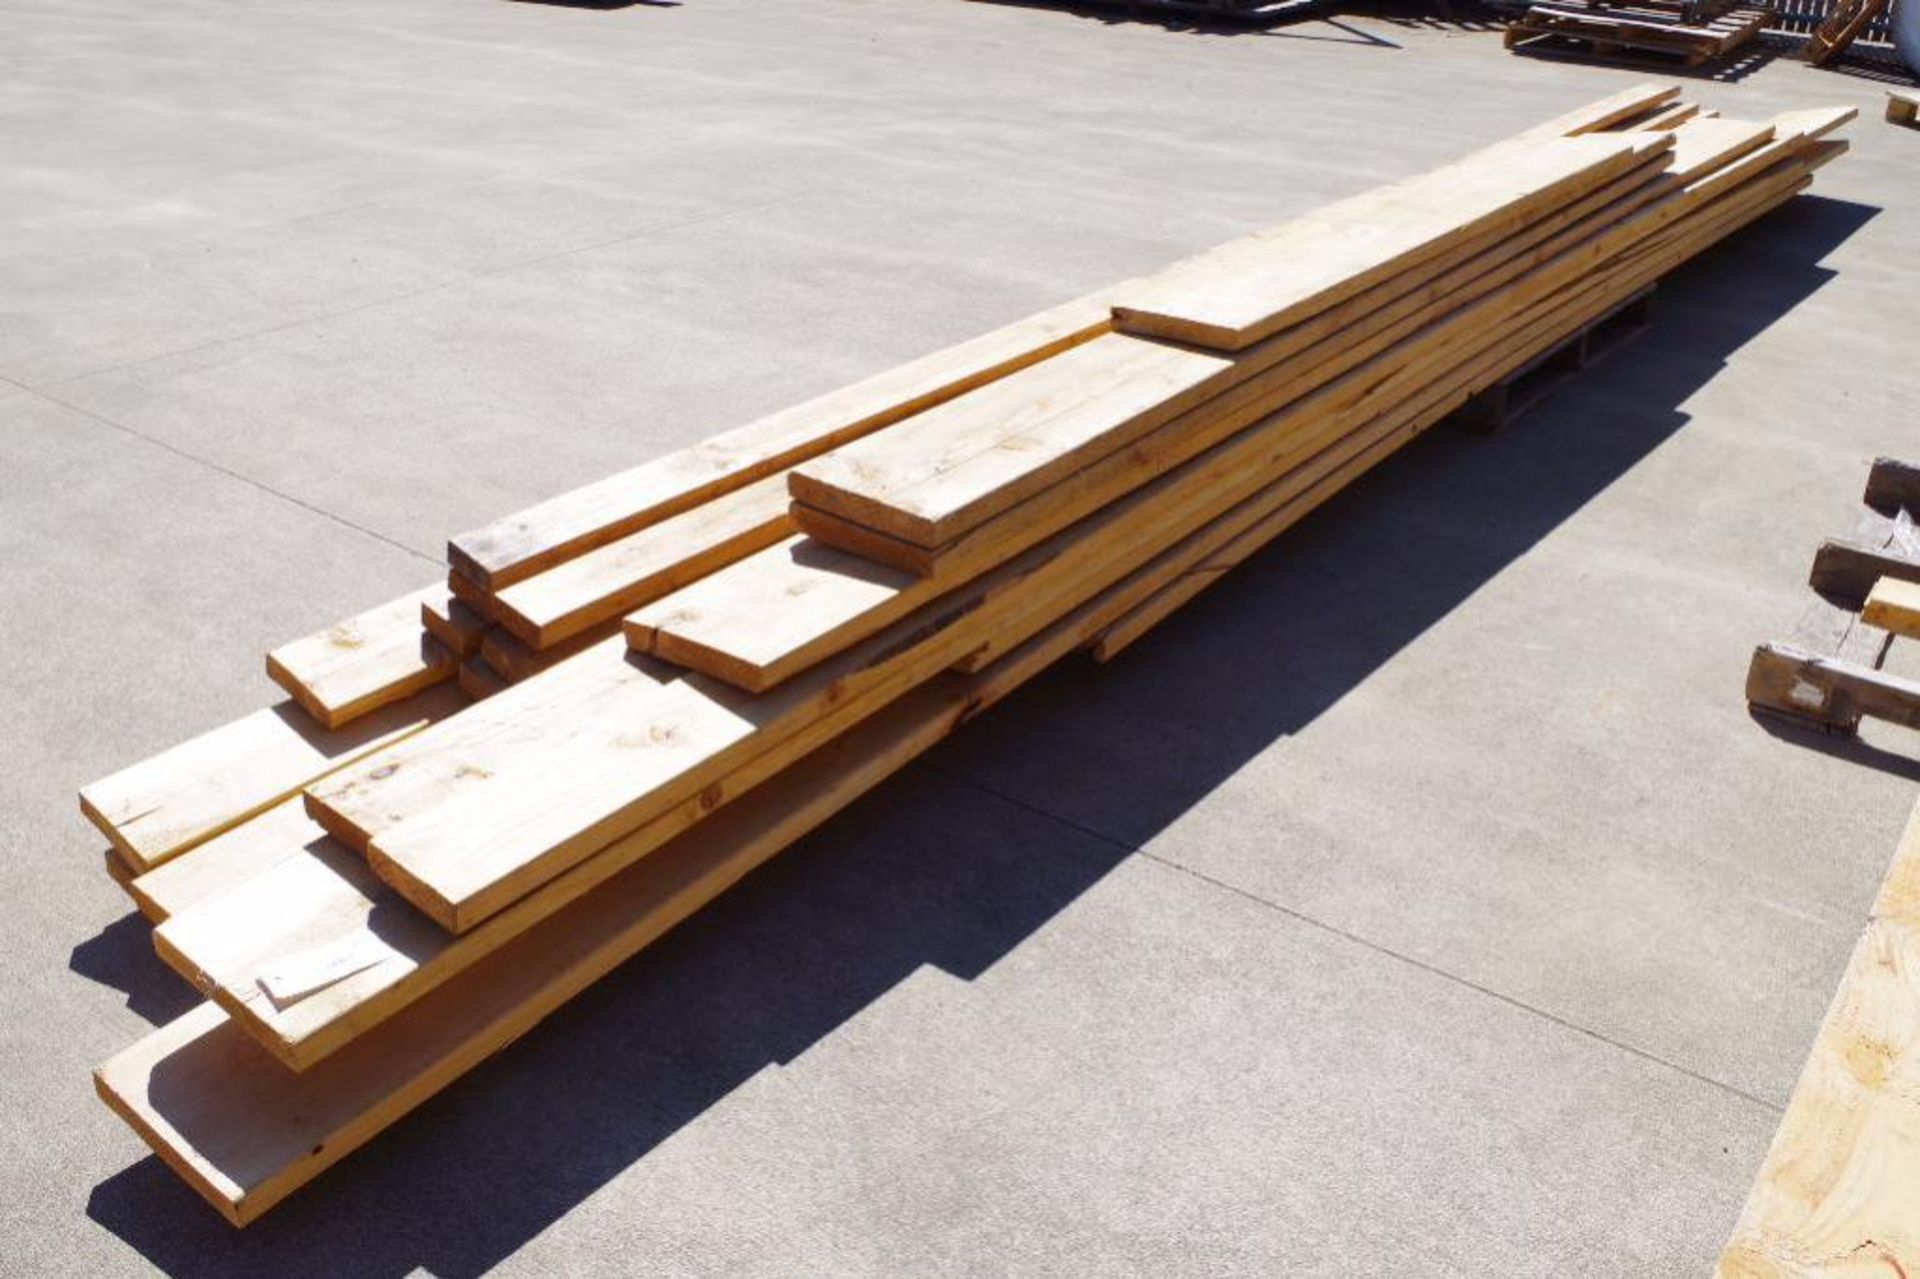 [QTY] Dimensional Lumber: 2x10s, 2x6s, 2x4s; Includes (12) 6" x 16' Cedar Bevel Siding Boards - Image 3 of 4